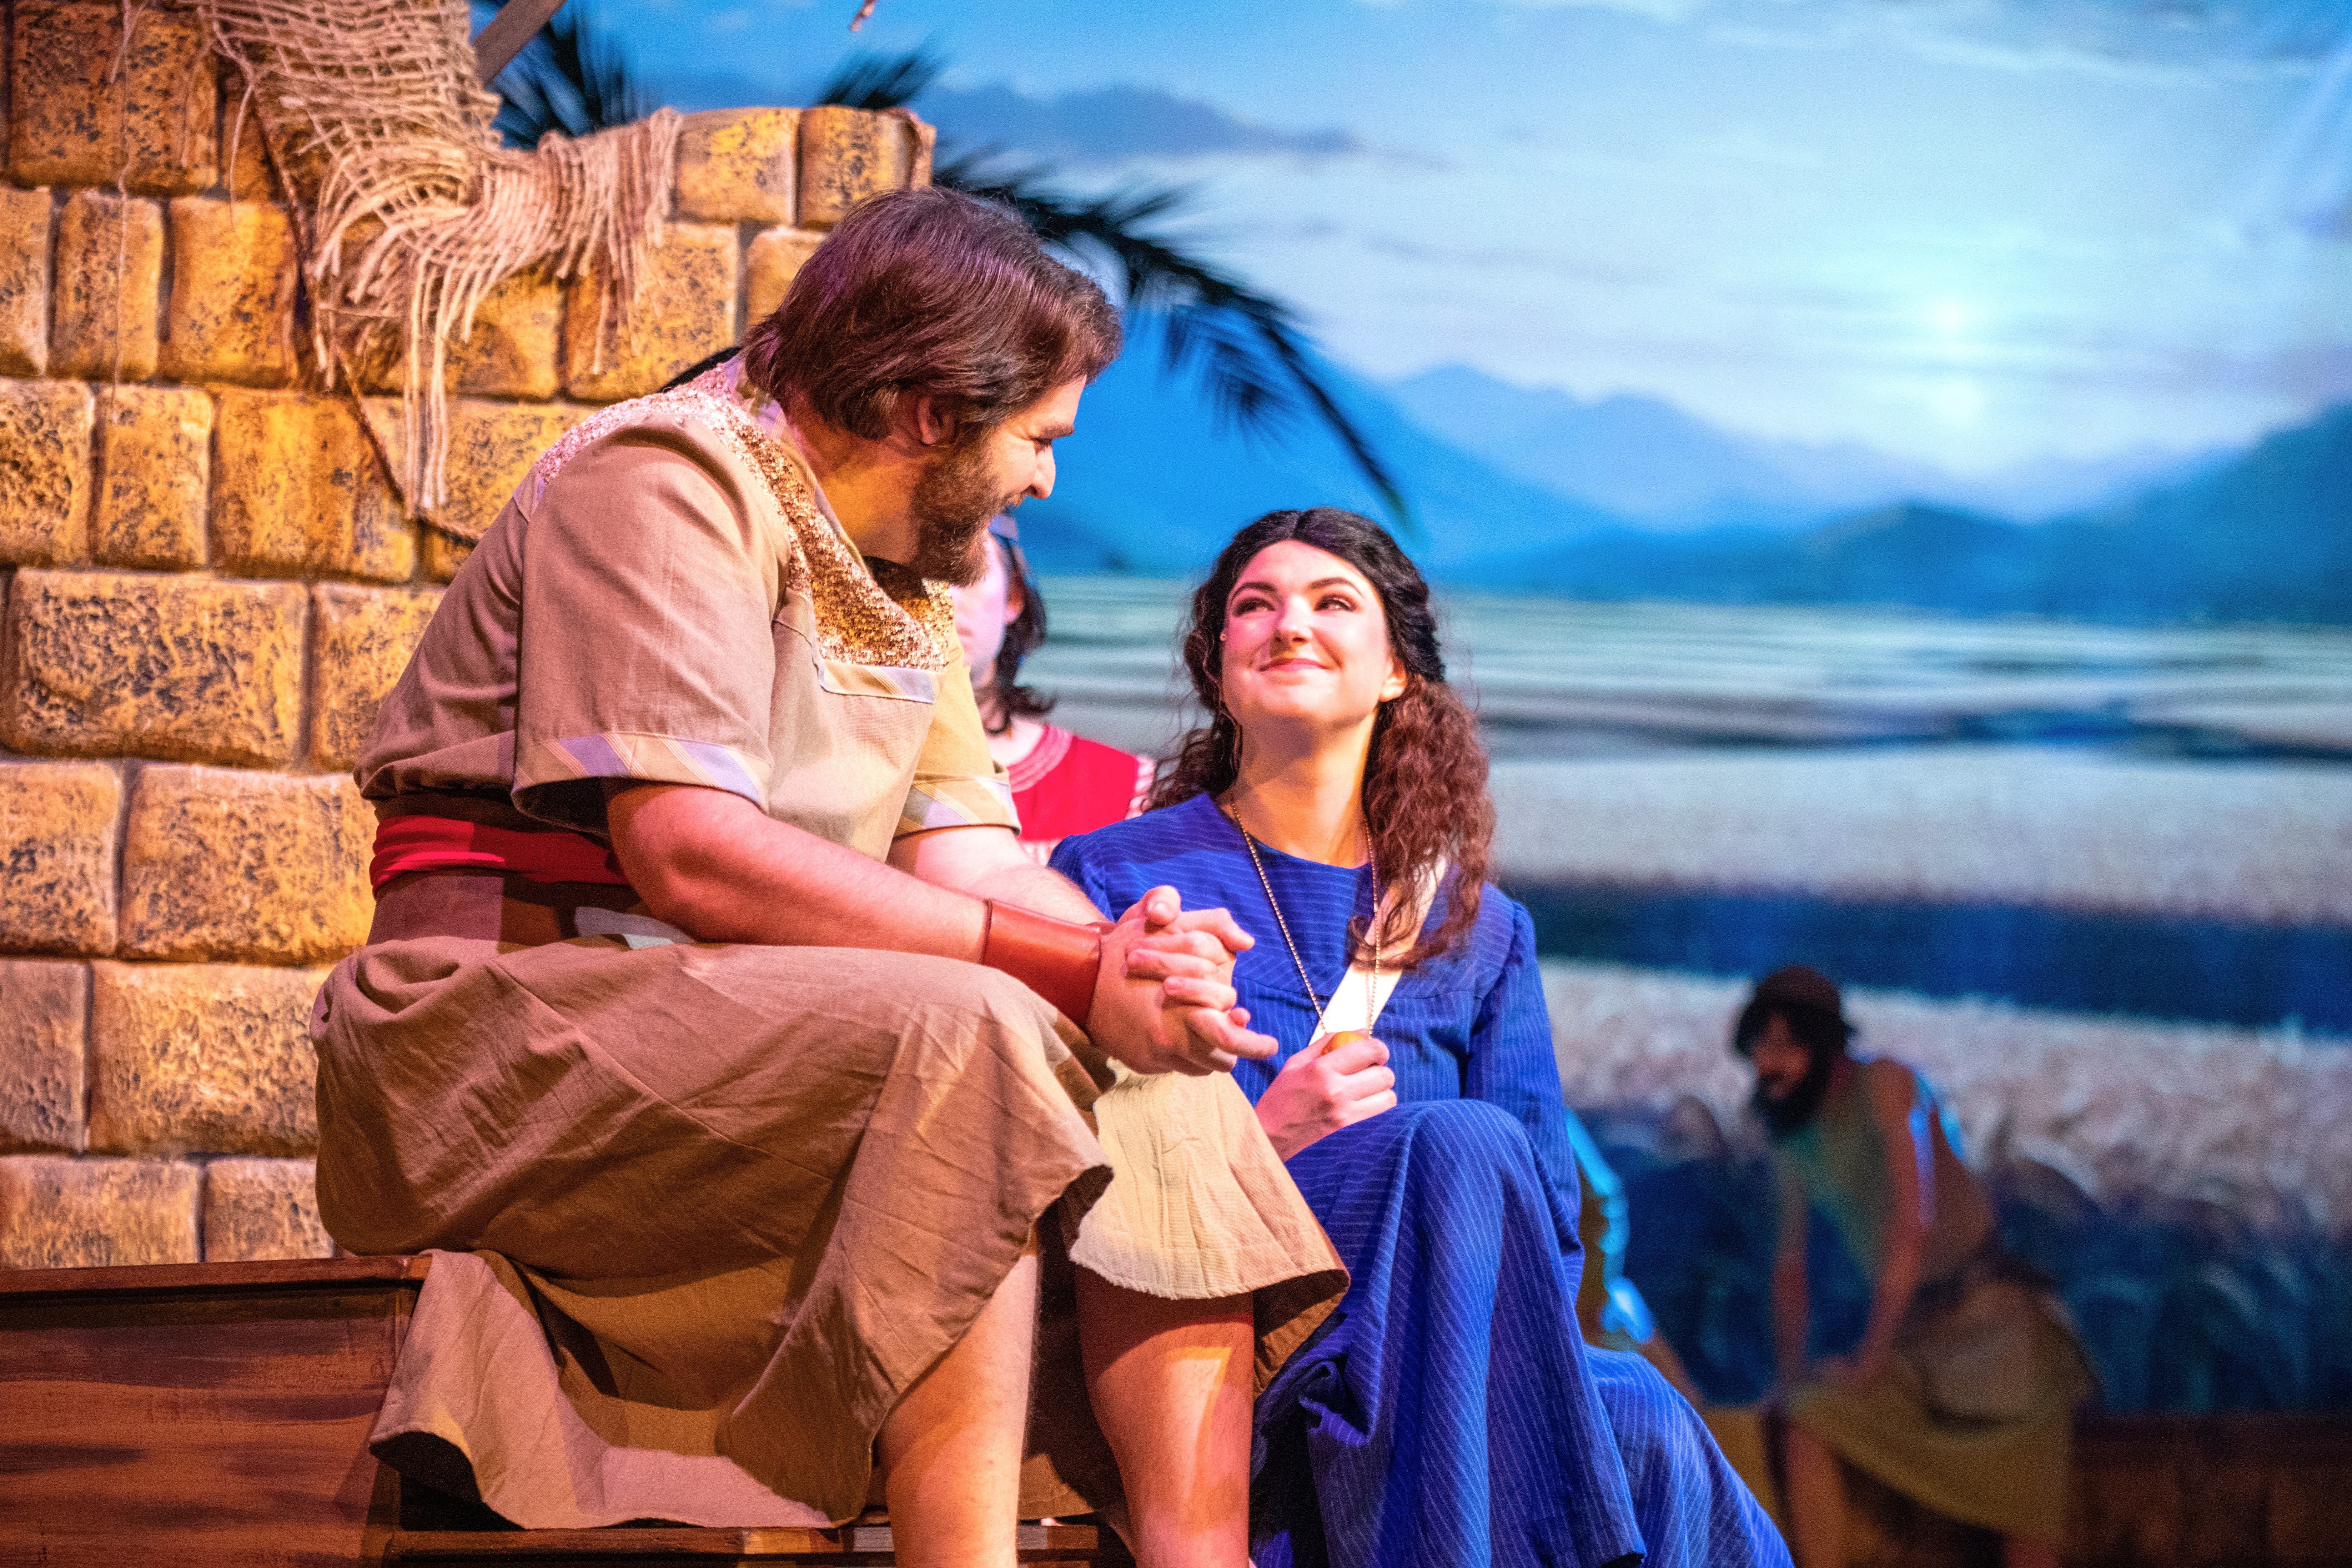 Ohio Star Theater's production of musical 'Ruth' is a story of faith and redemption